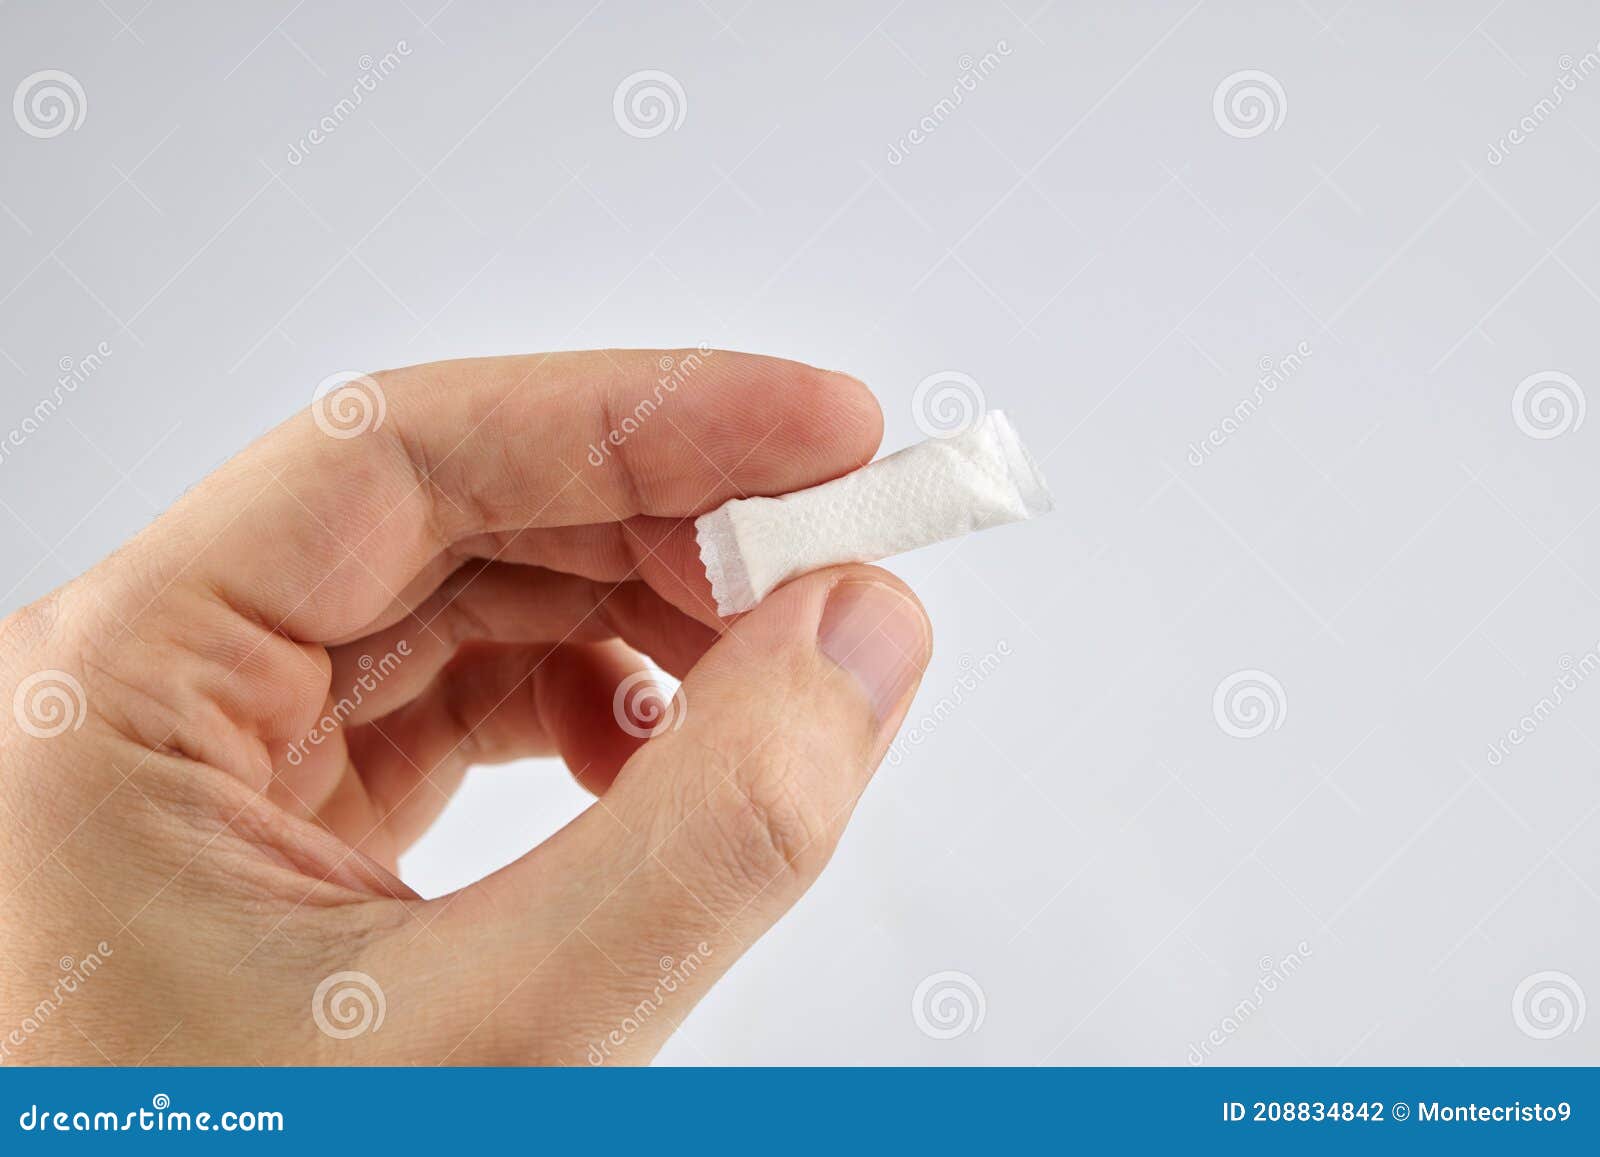 snus nicotine product at hand palm. copy space. stack of white small bags in the hand